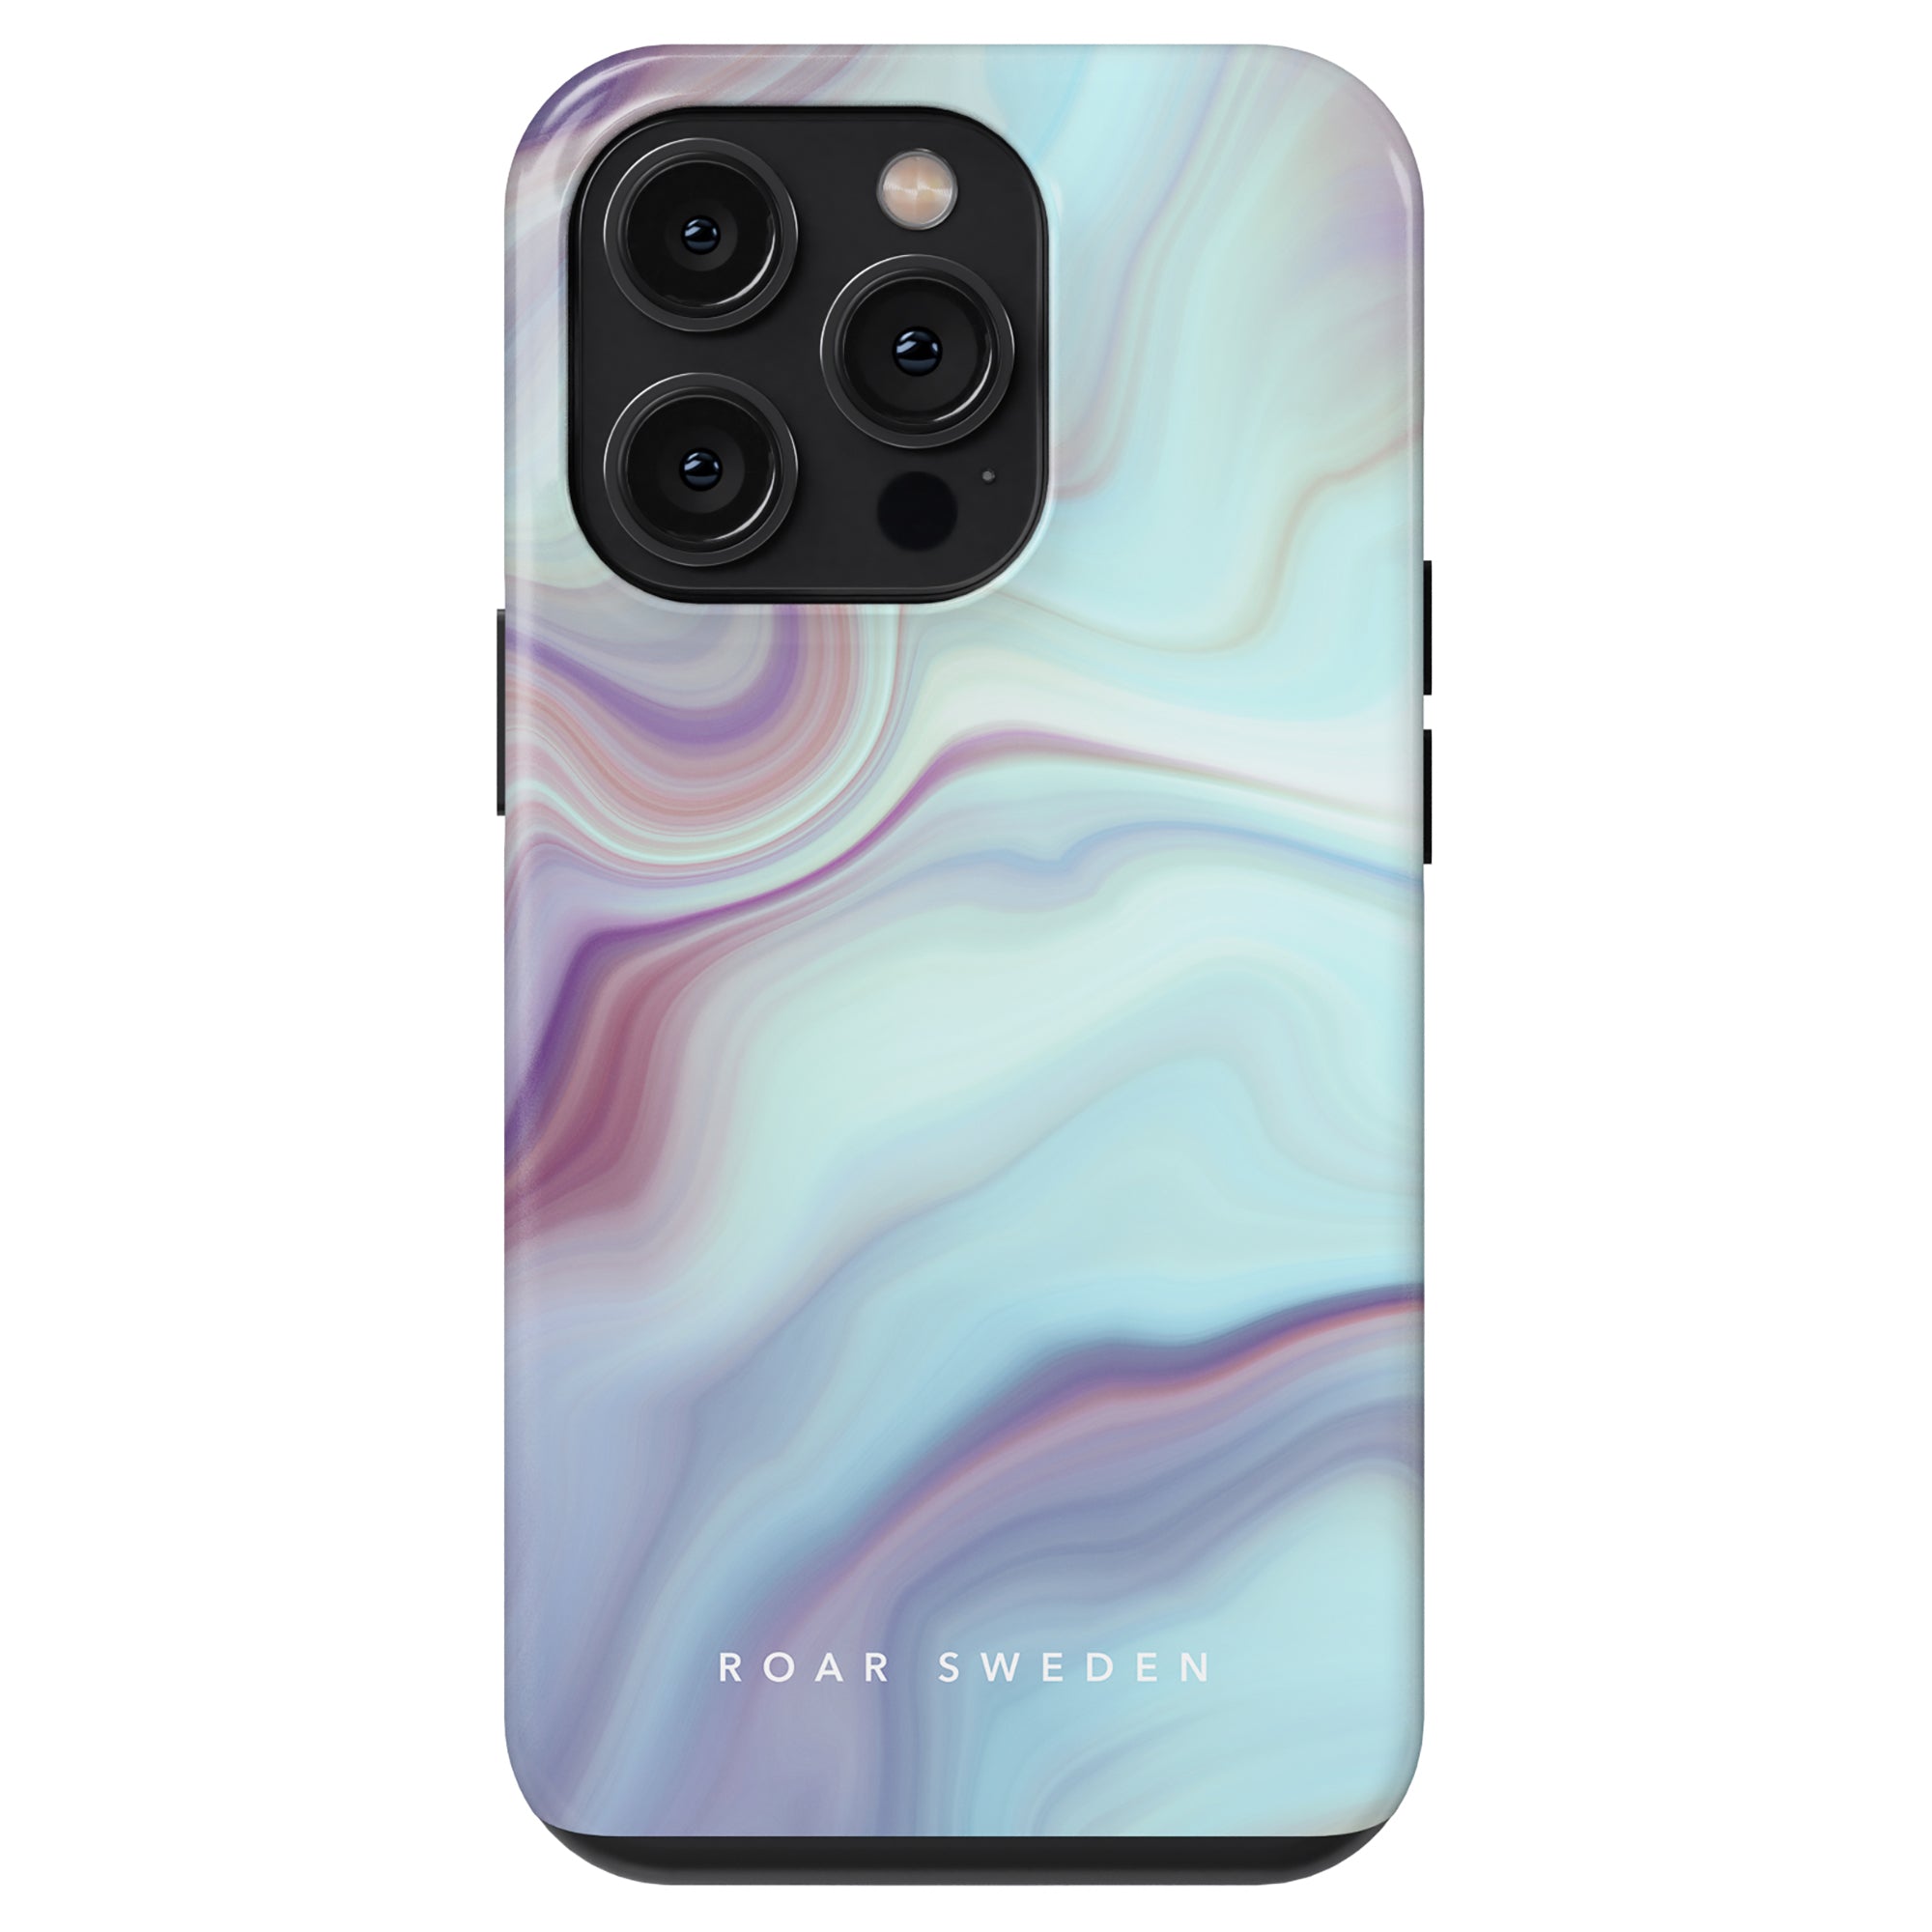 A smartphone with a pastel marble Abalone - Tough Case and three cameras, labeled "roar sweden" at the bottom.